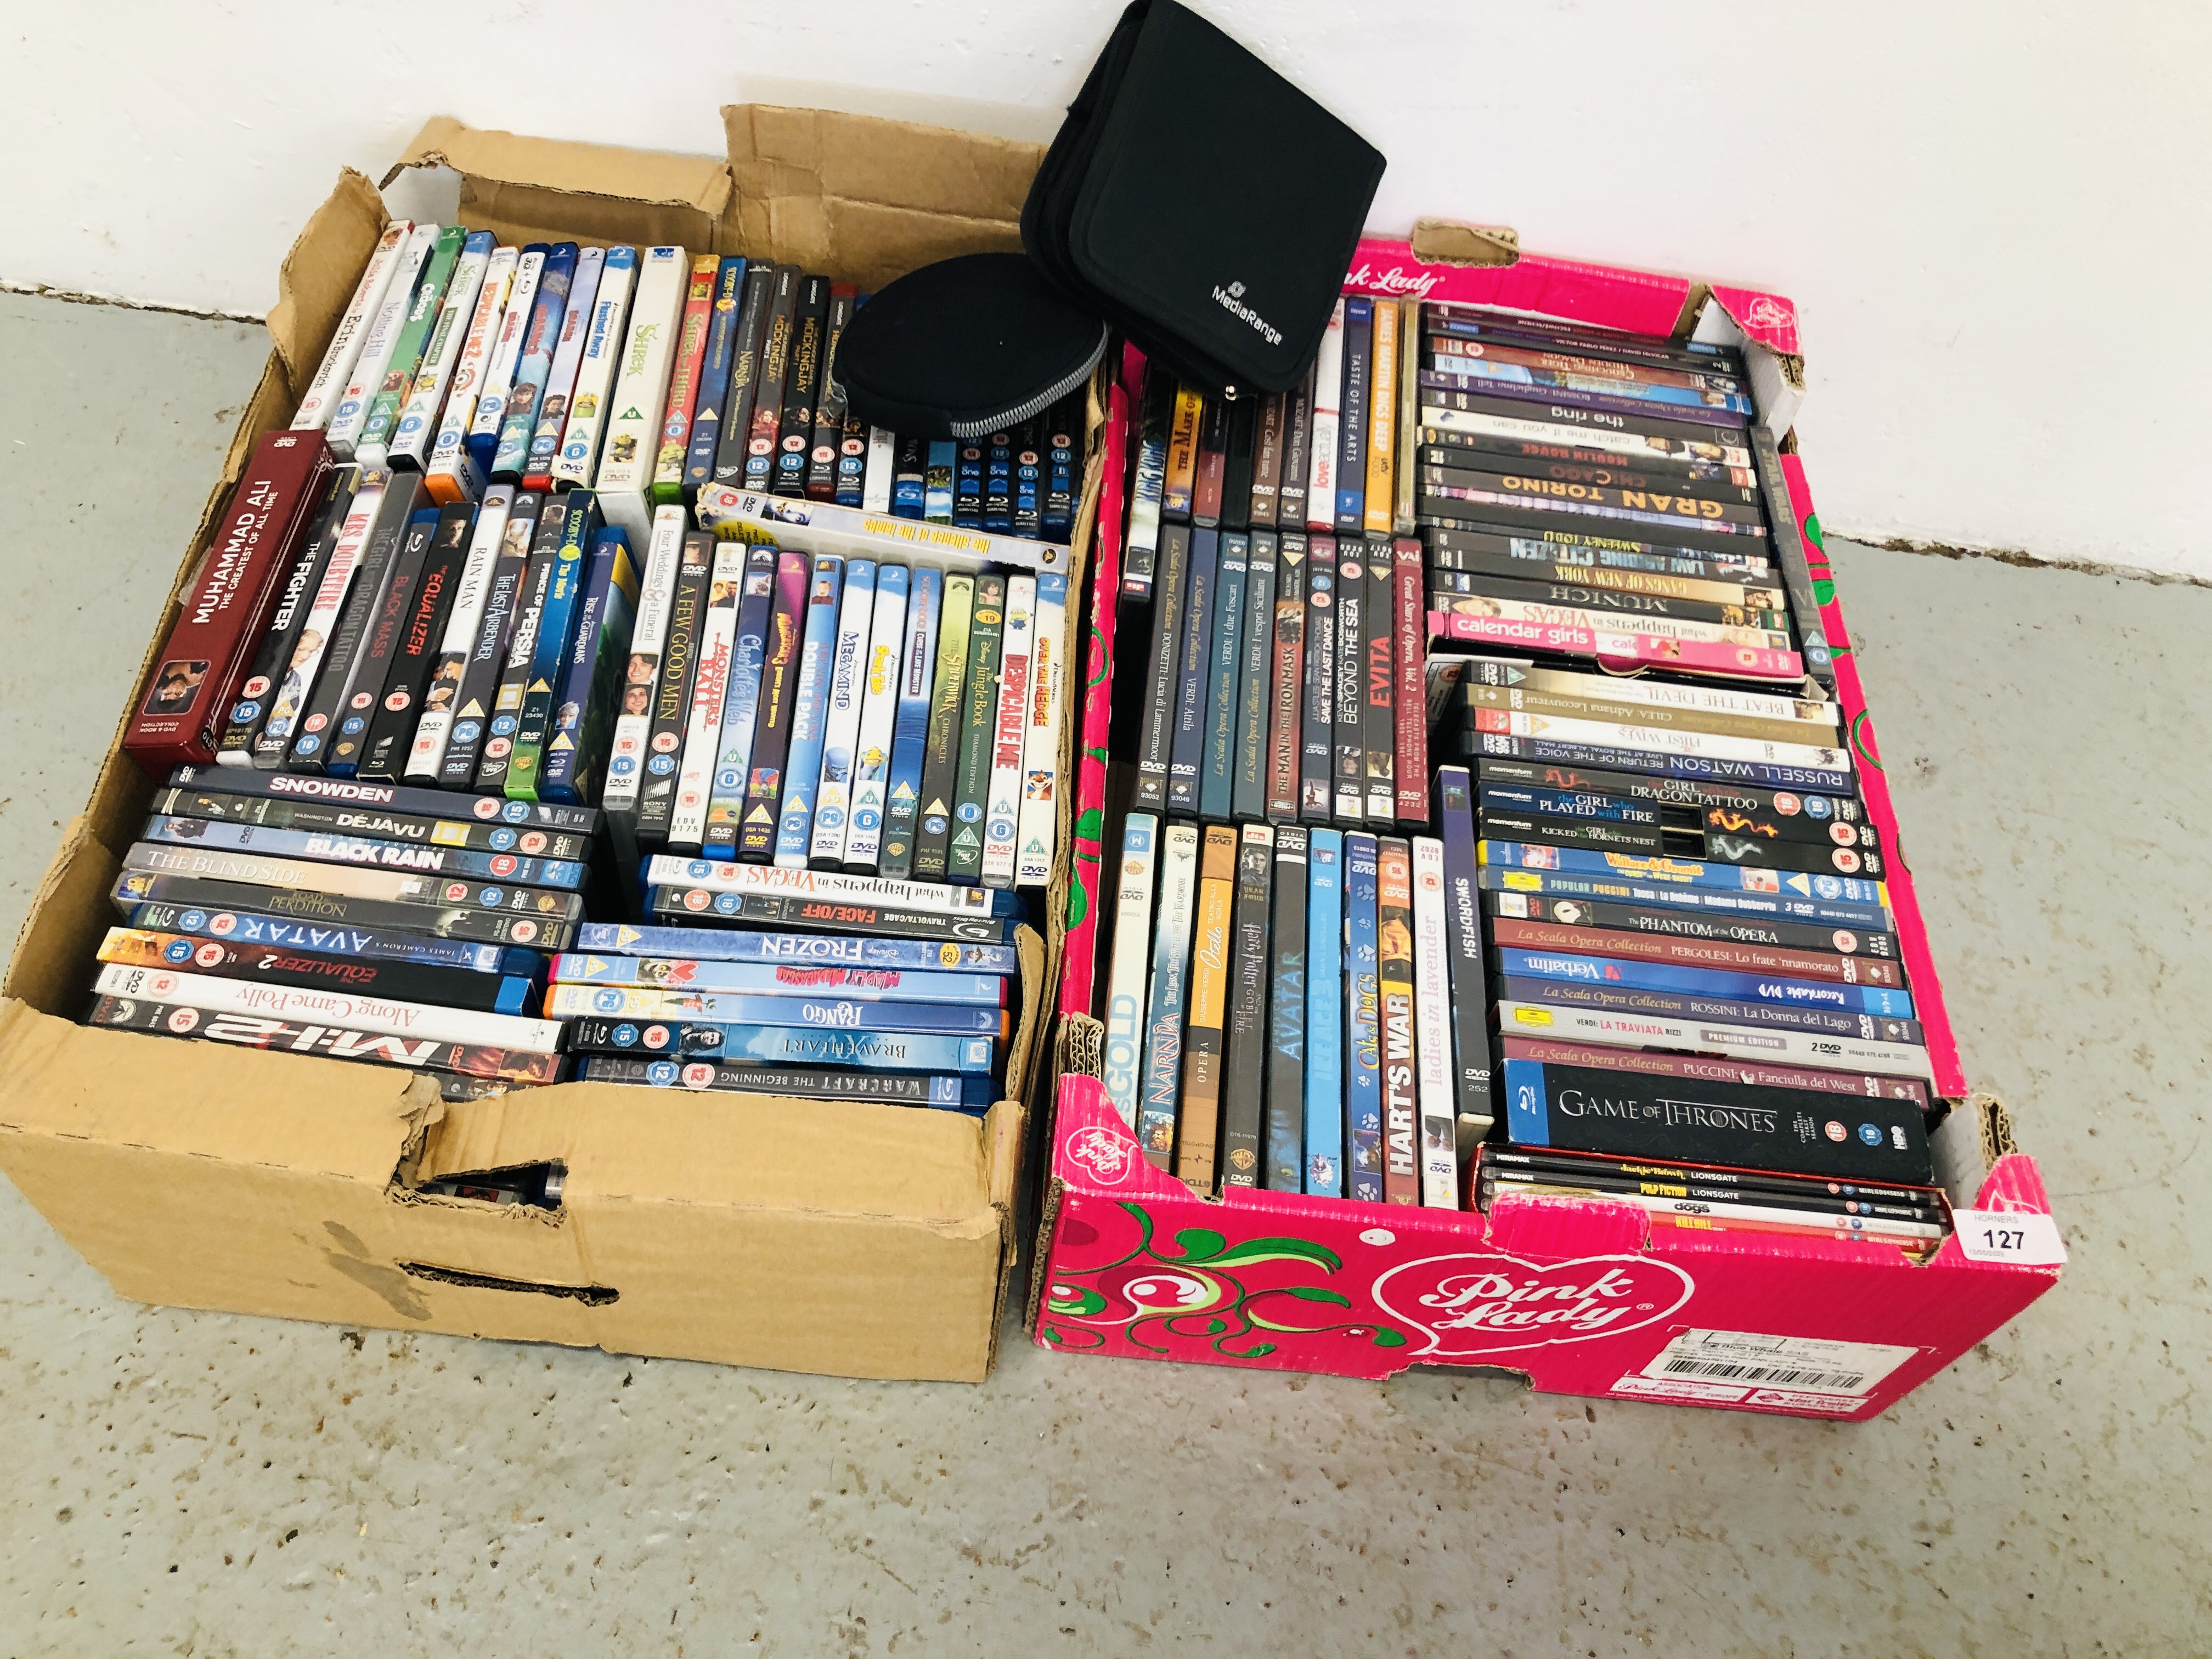 2 X BOXES OF ASSORTED DVD'S